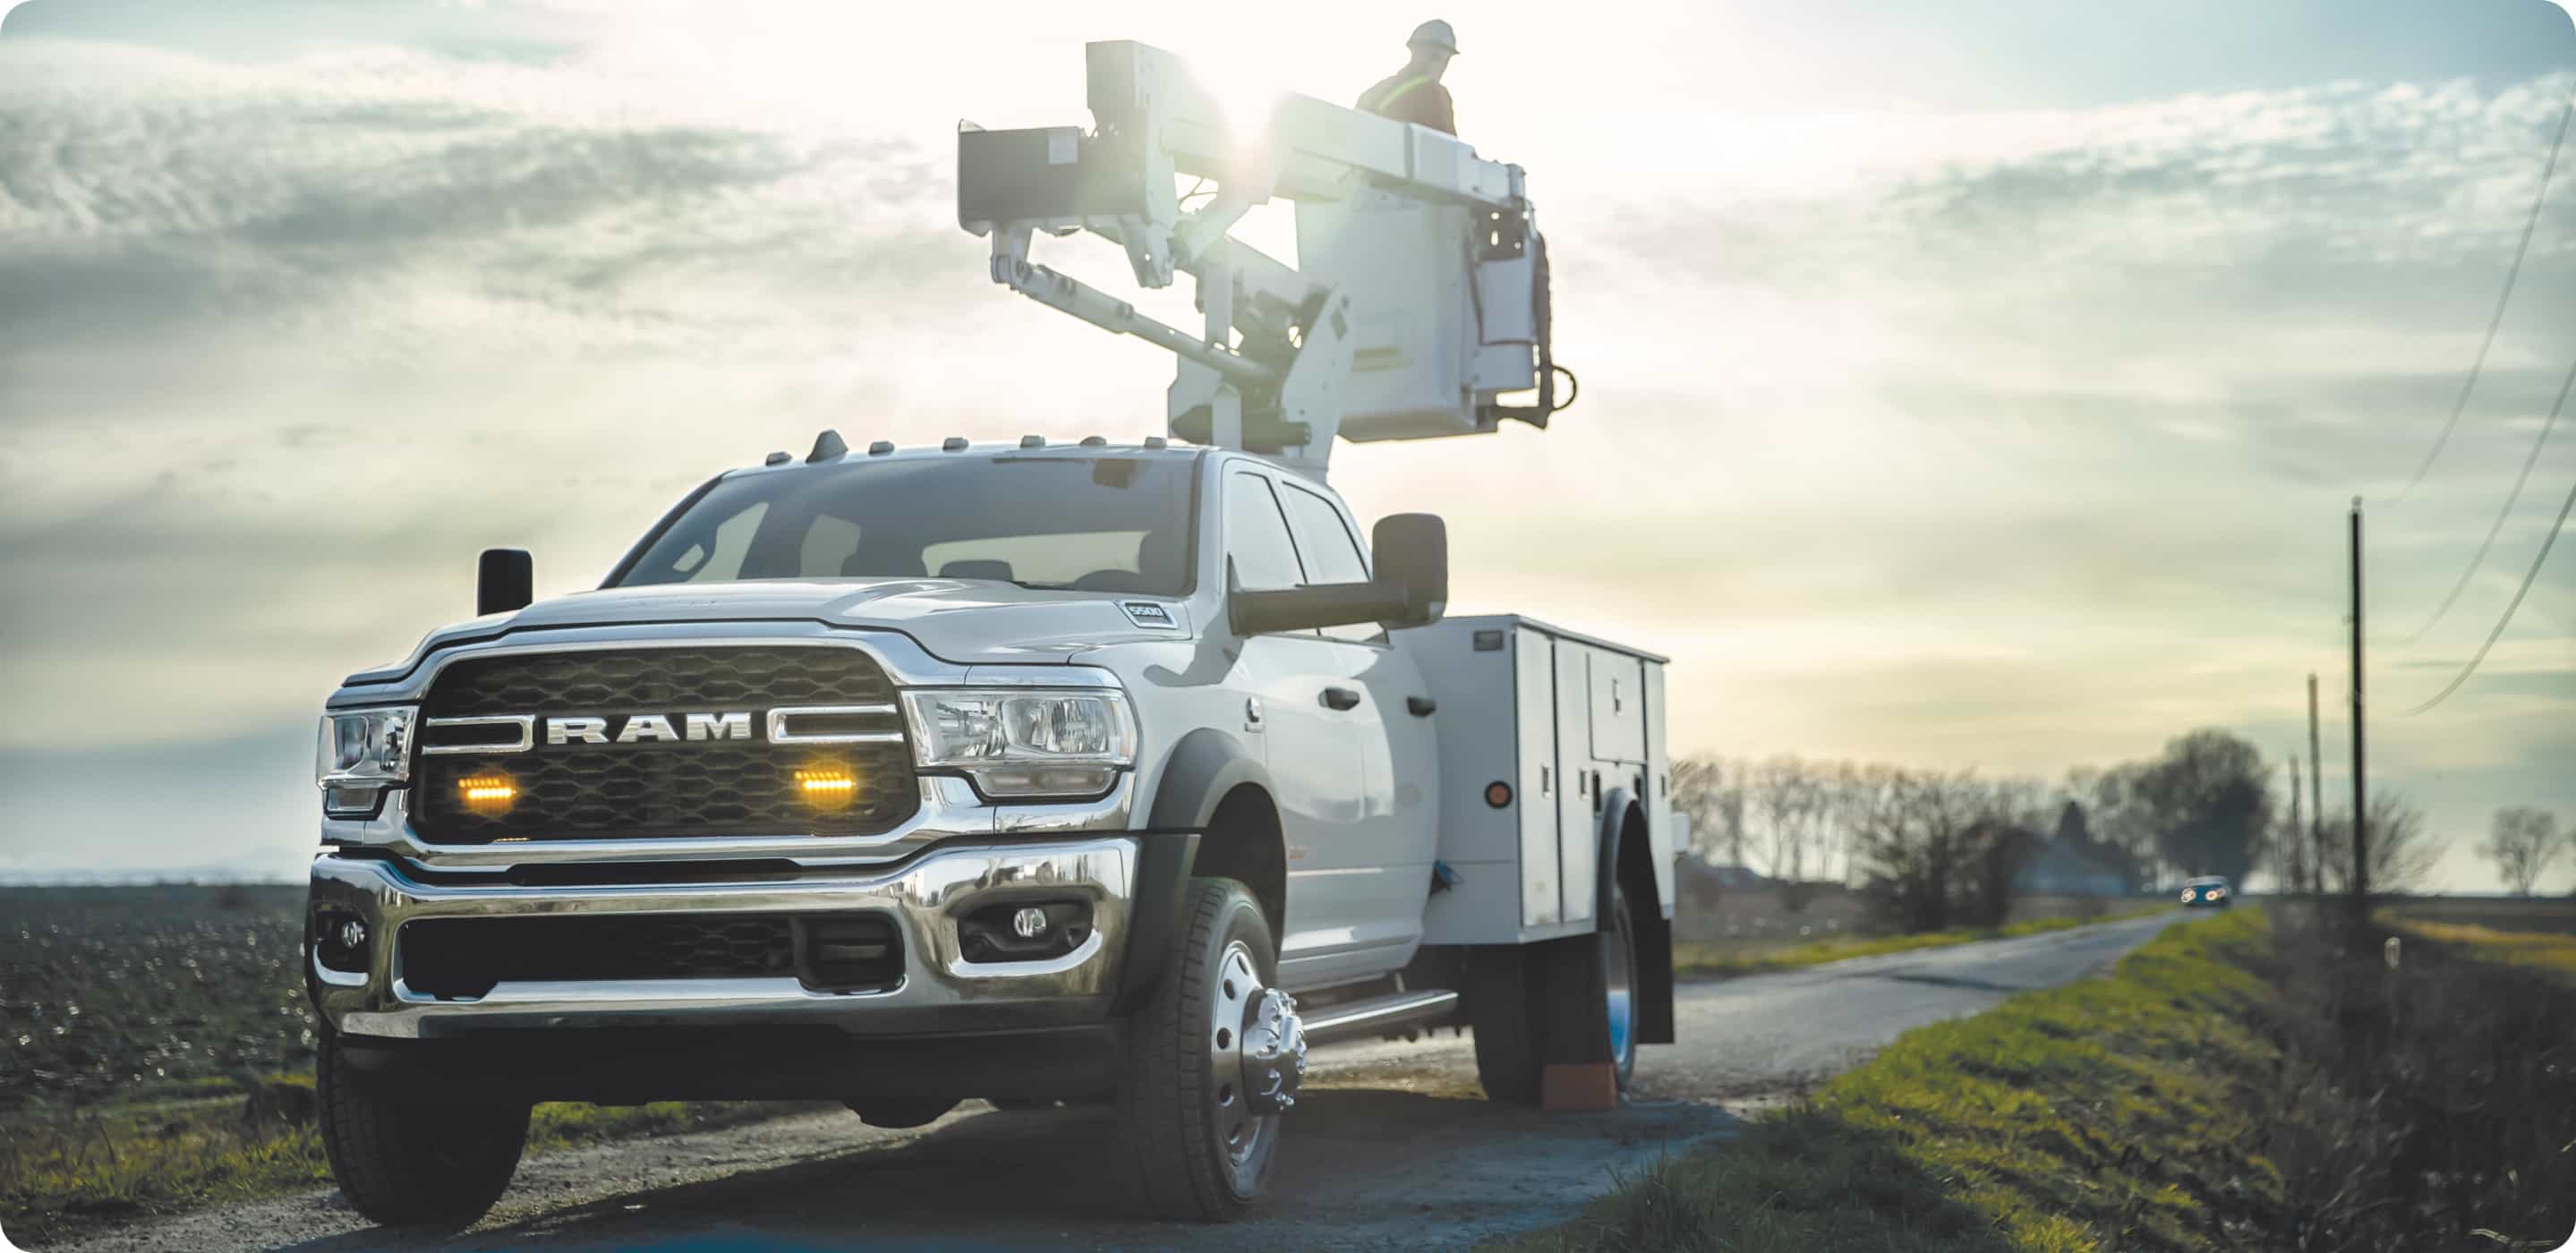 Display The 2021 Ram Chassis Cab with a cherry picker upfit with a worker in the bucket.